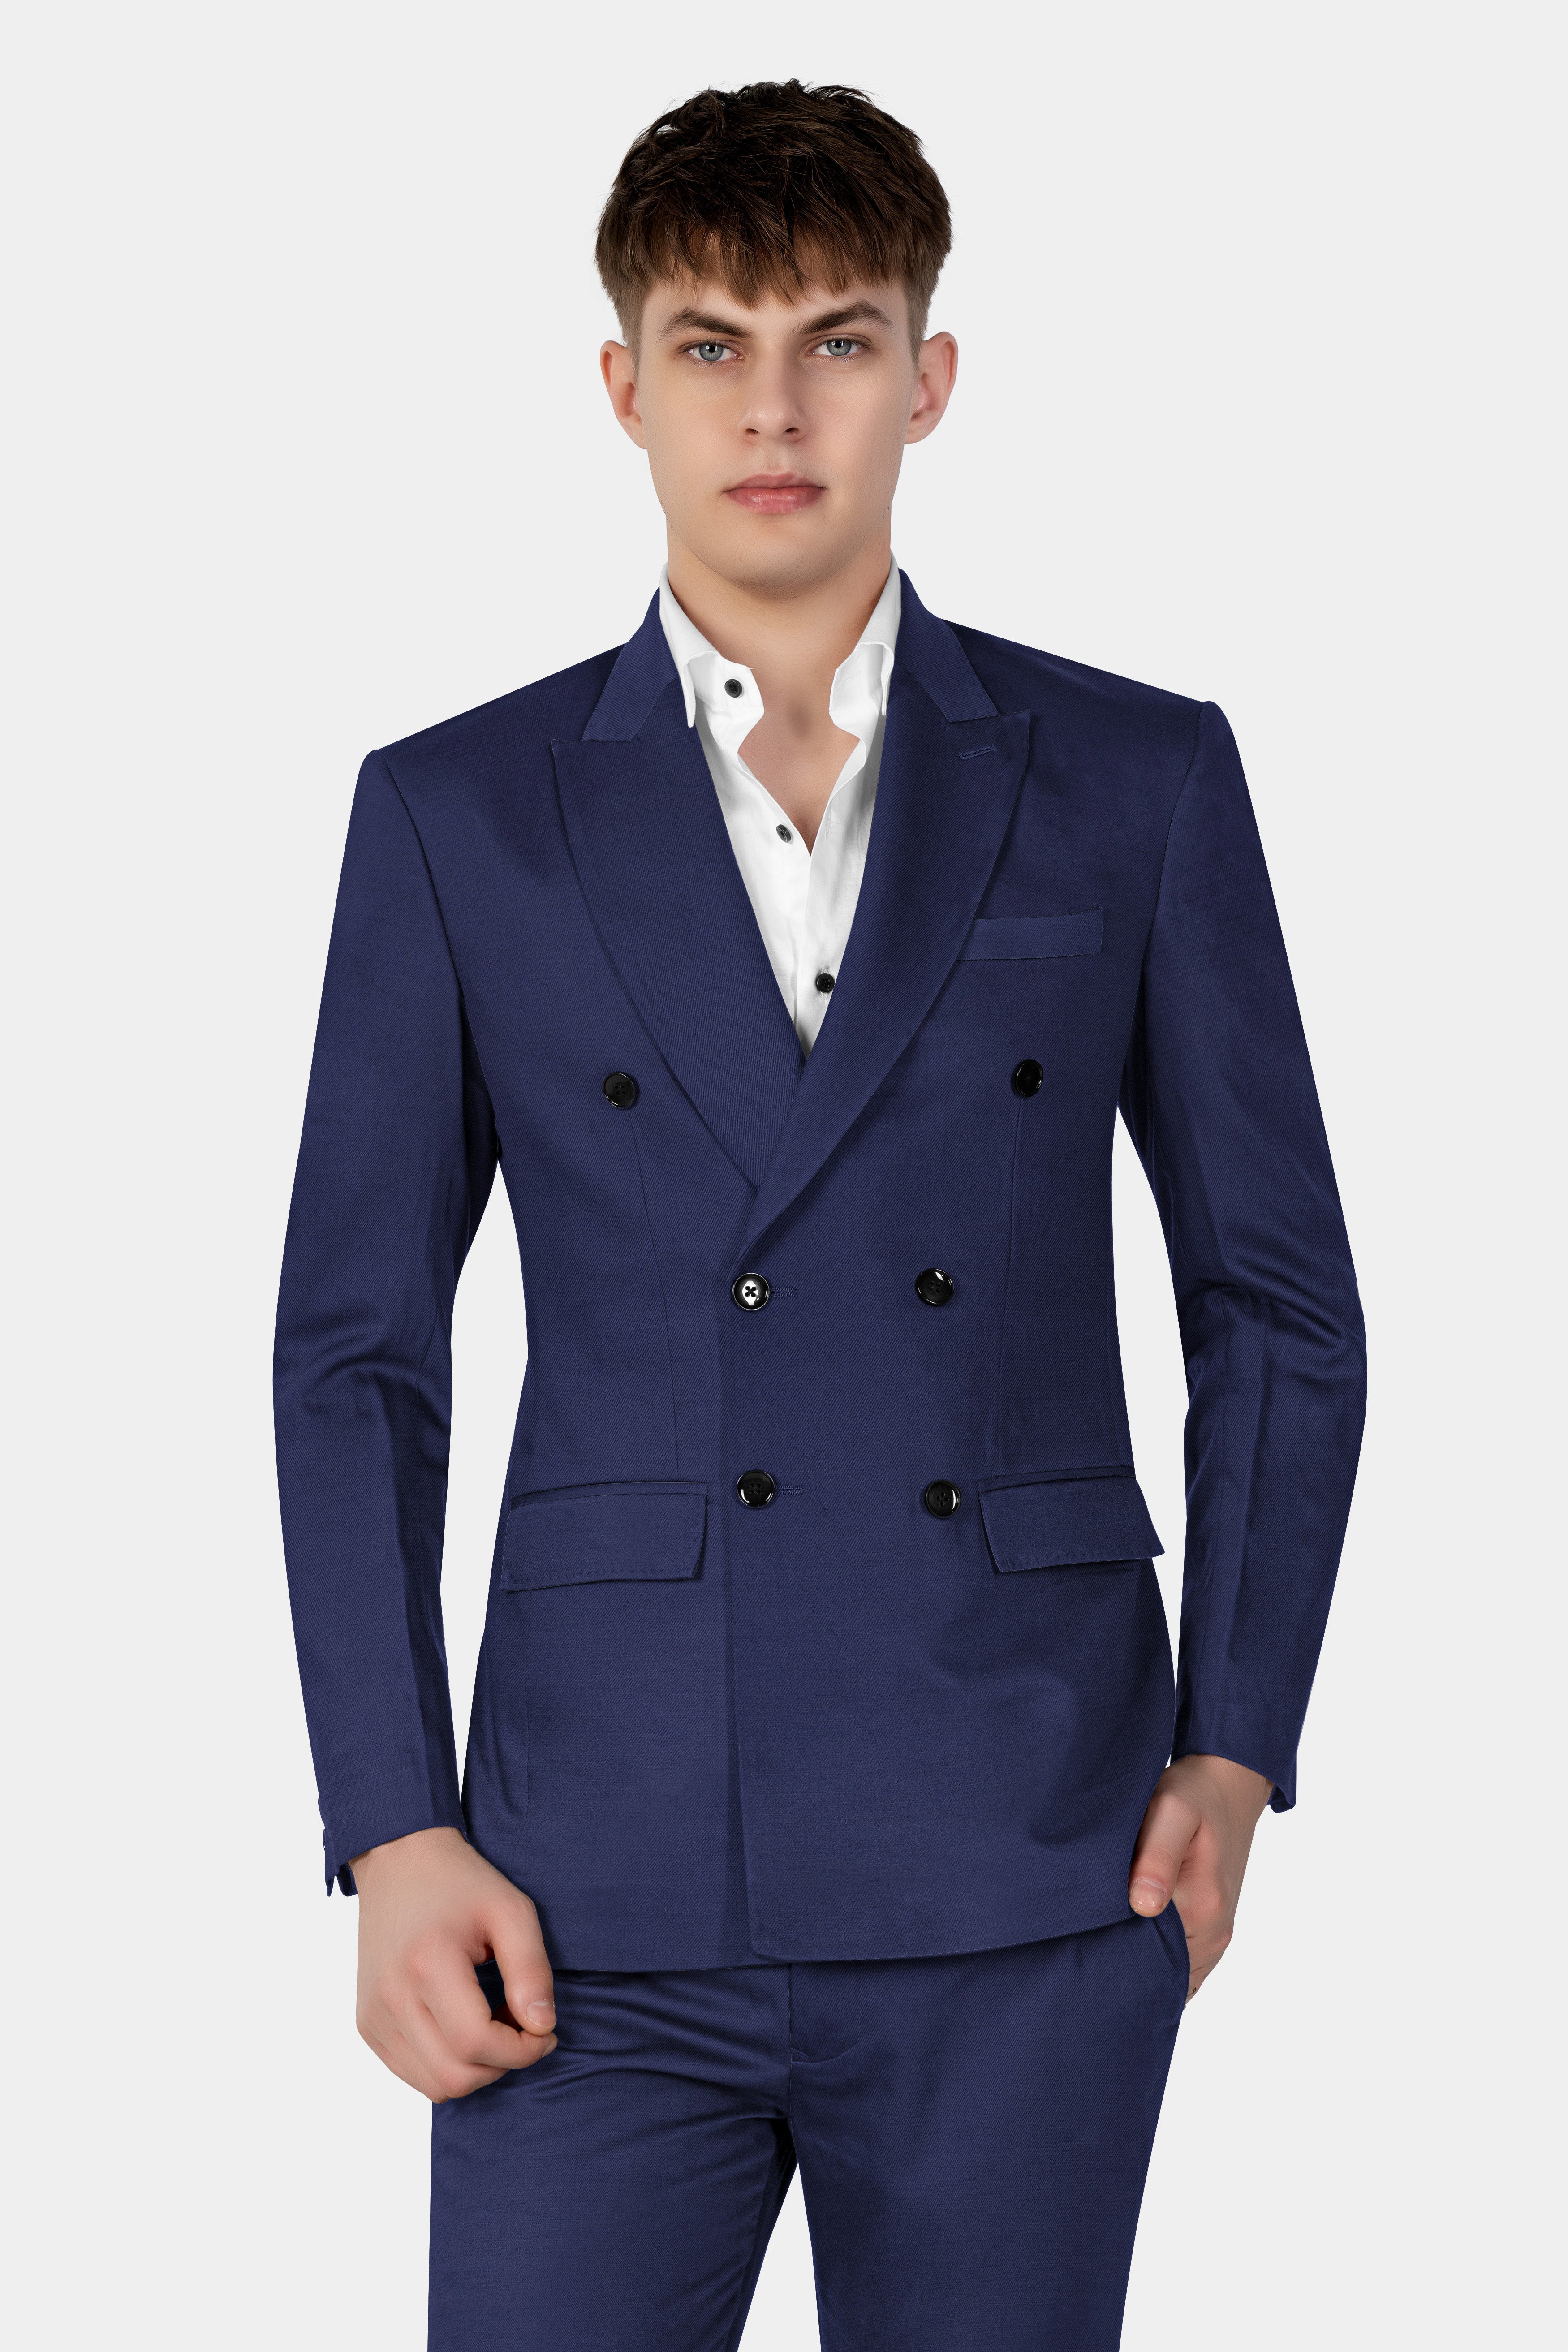 Tealish Blue Plain Solid Wool Blend Double Breasted Suit